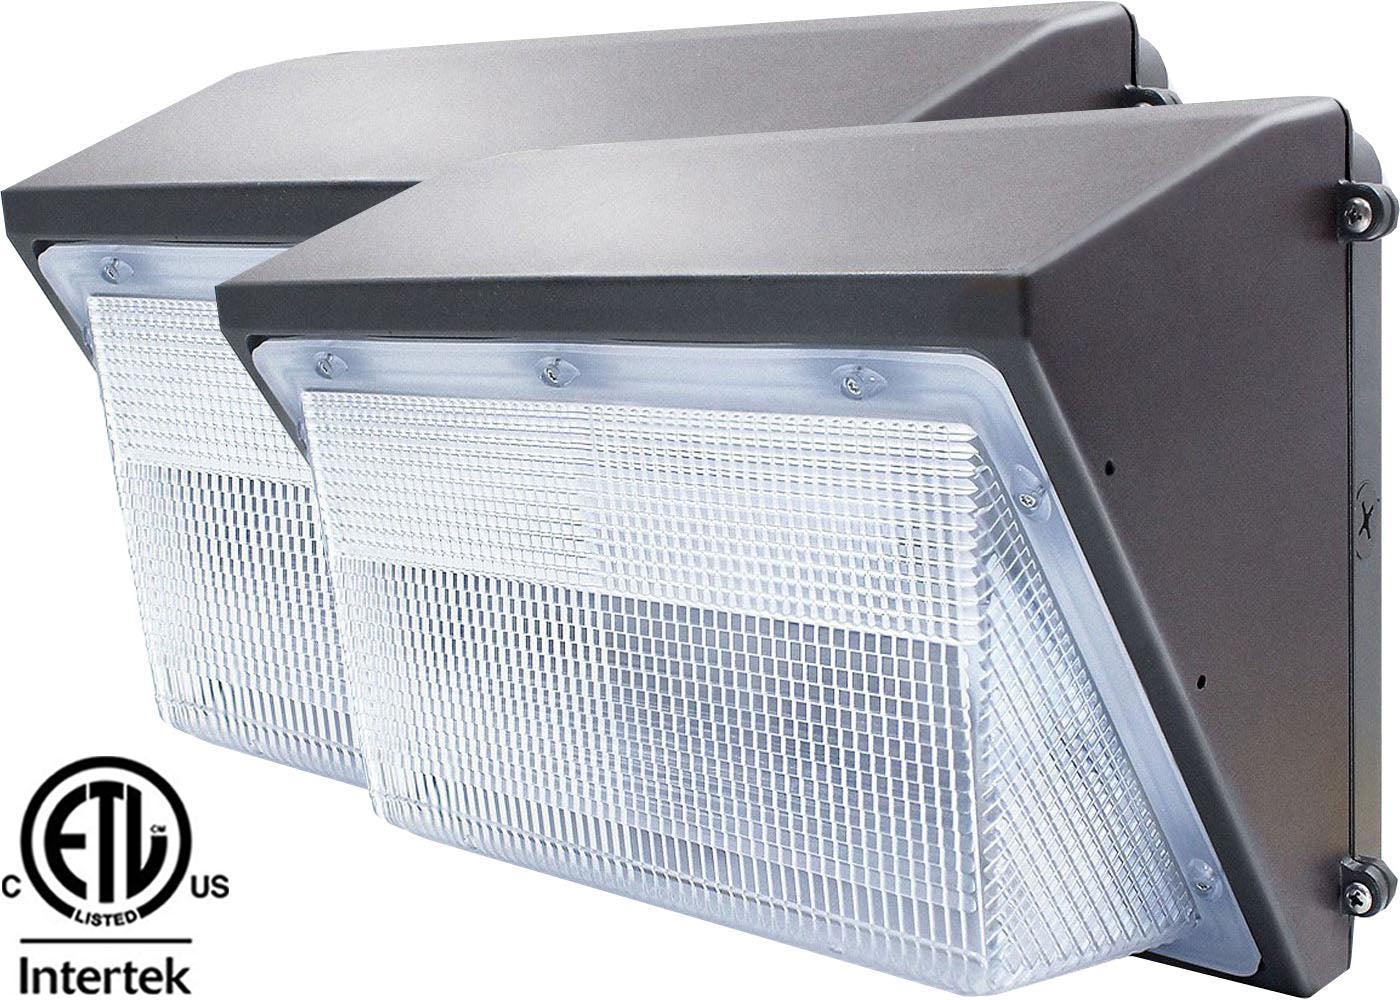 Outdoor LED Wall Pack Lights Canada 42w Photocell 5000k 6000k cETL Yard